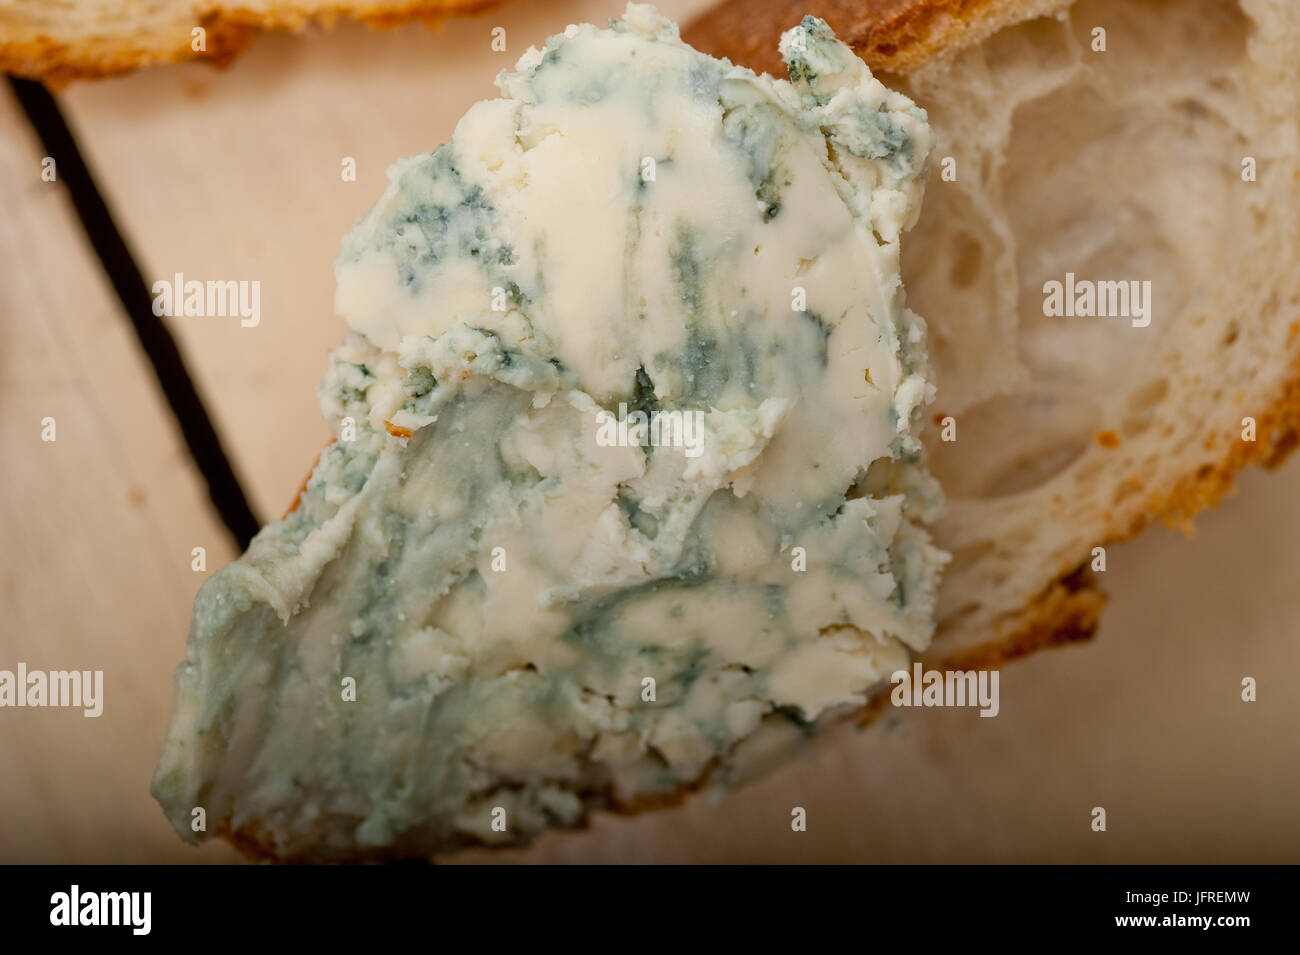 fresh blue cheese spread ove french baguette Stock Photo